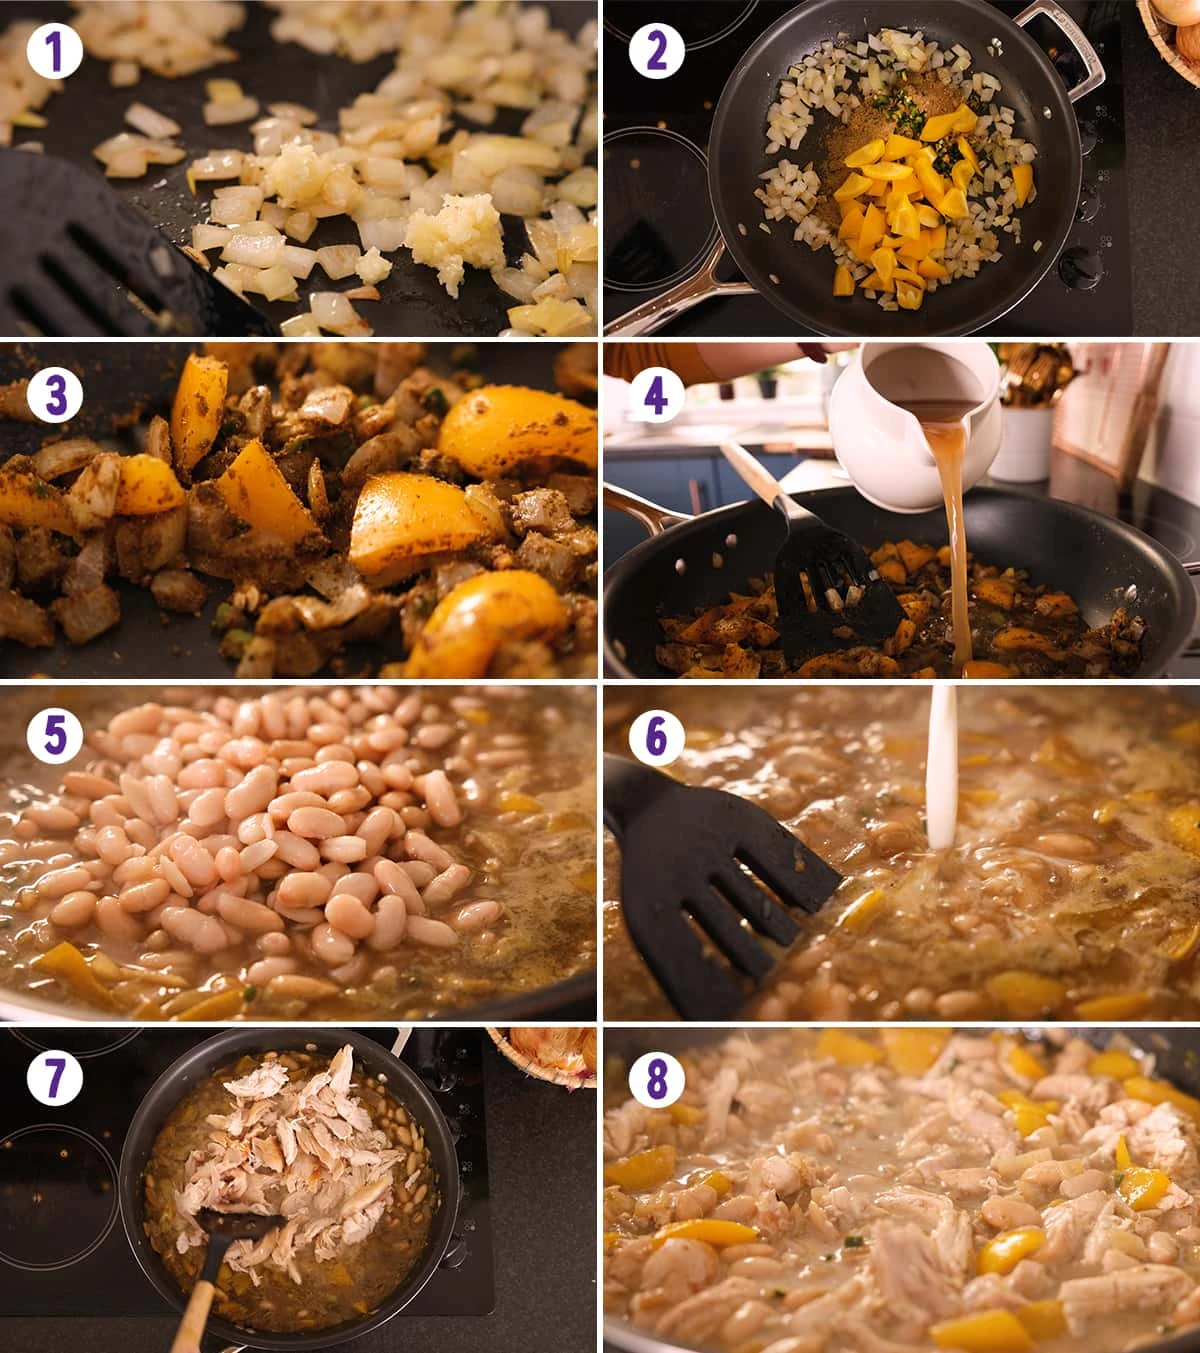 8 image collage showing how to make white chilli chicken con carne